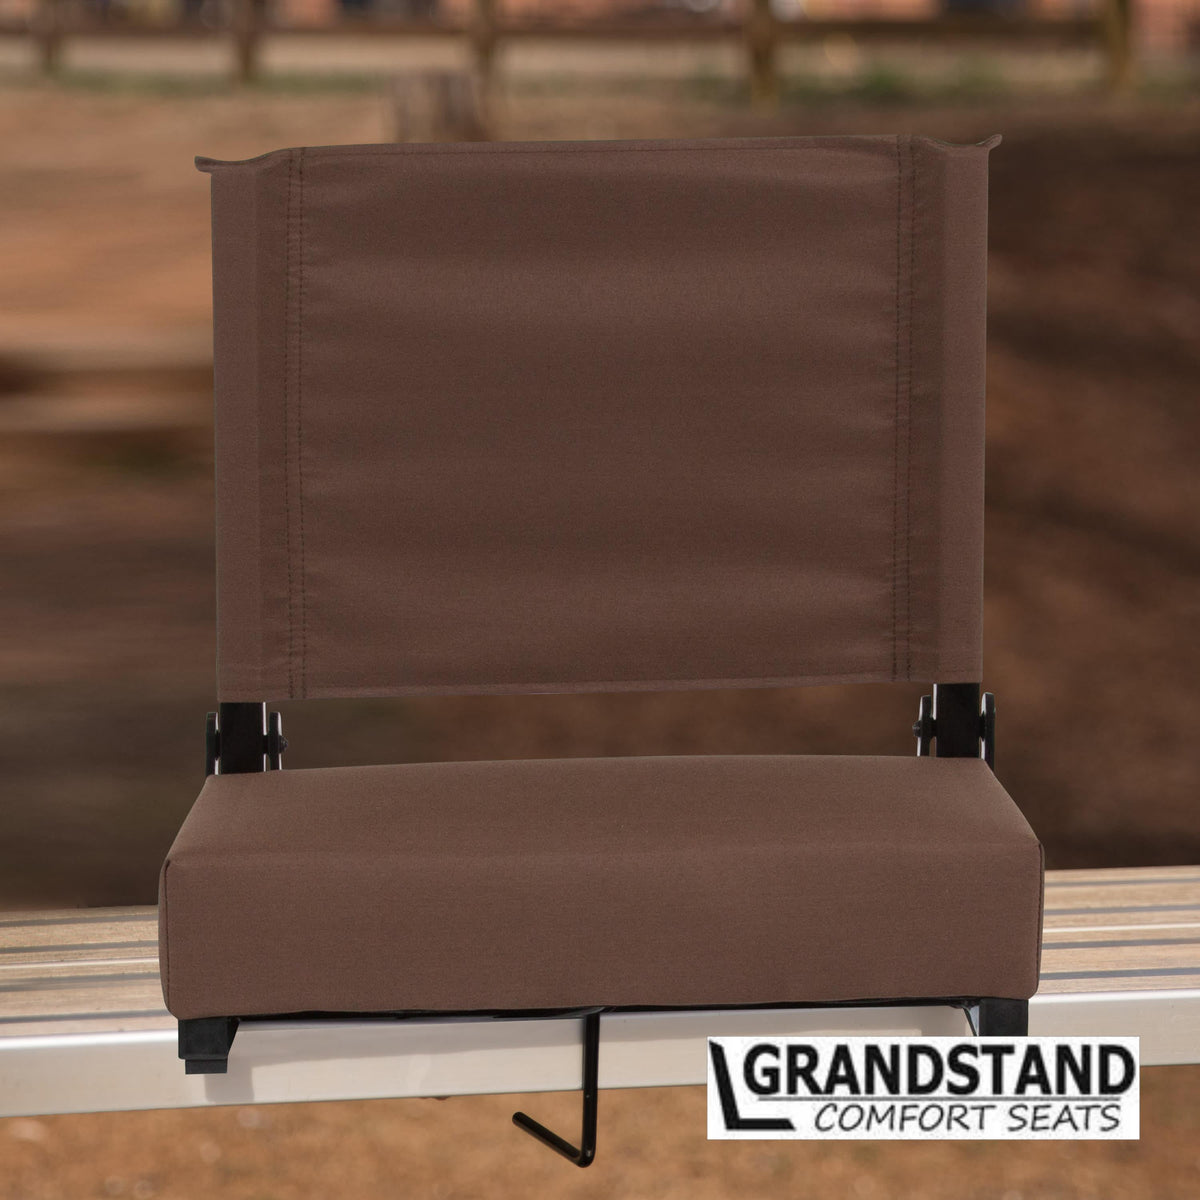 Brown |#| 500 lb. Rated Lightweight Stadium Chair-Handle-Padded Seat, Brown